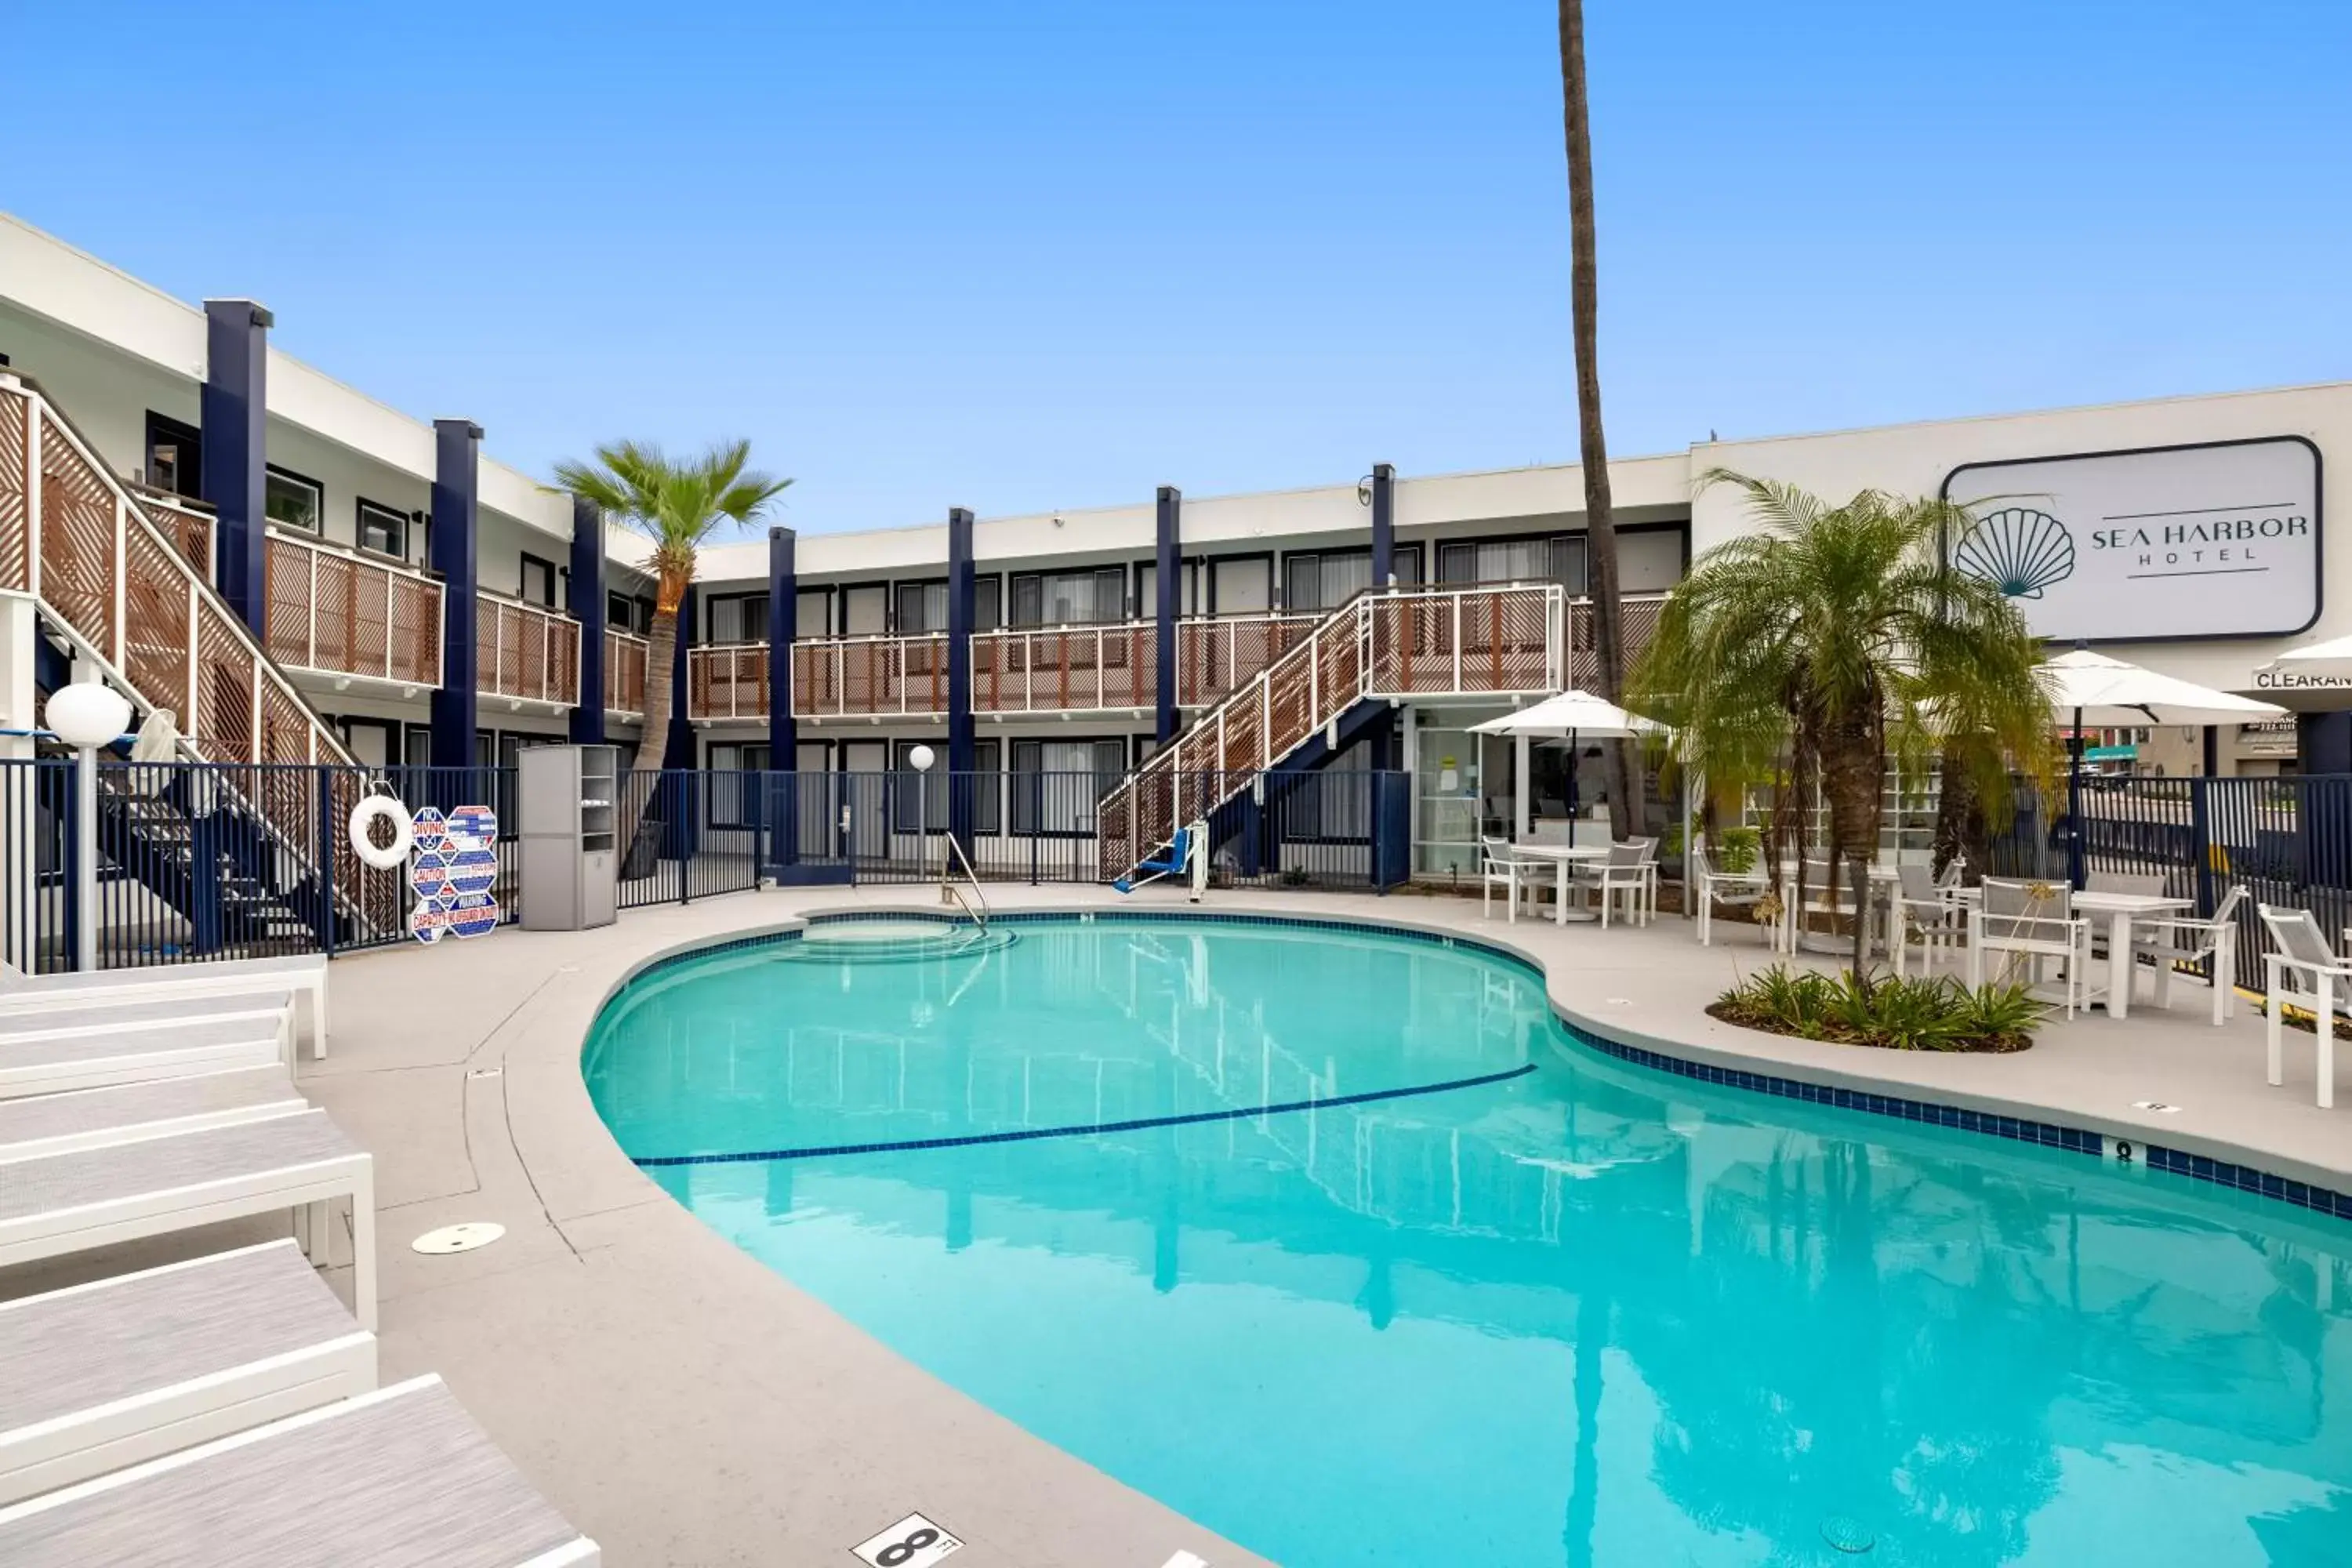 Swimming pool, Property Building in Sea Harbor Hotel - San Diego